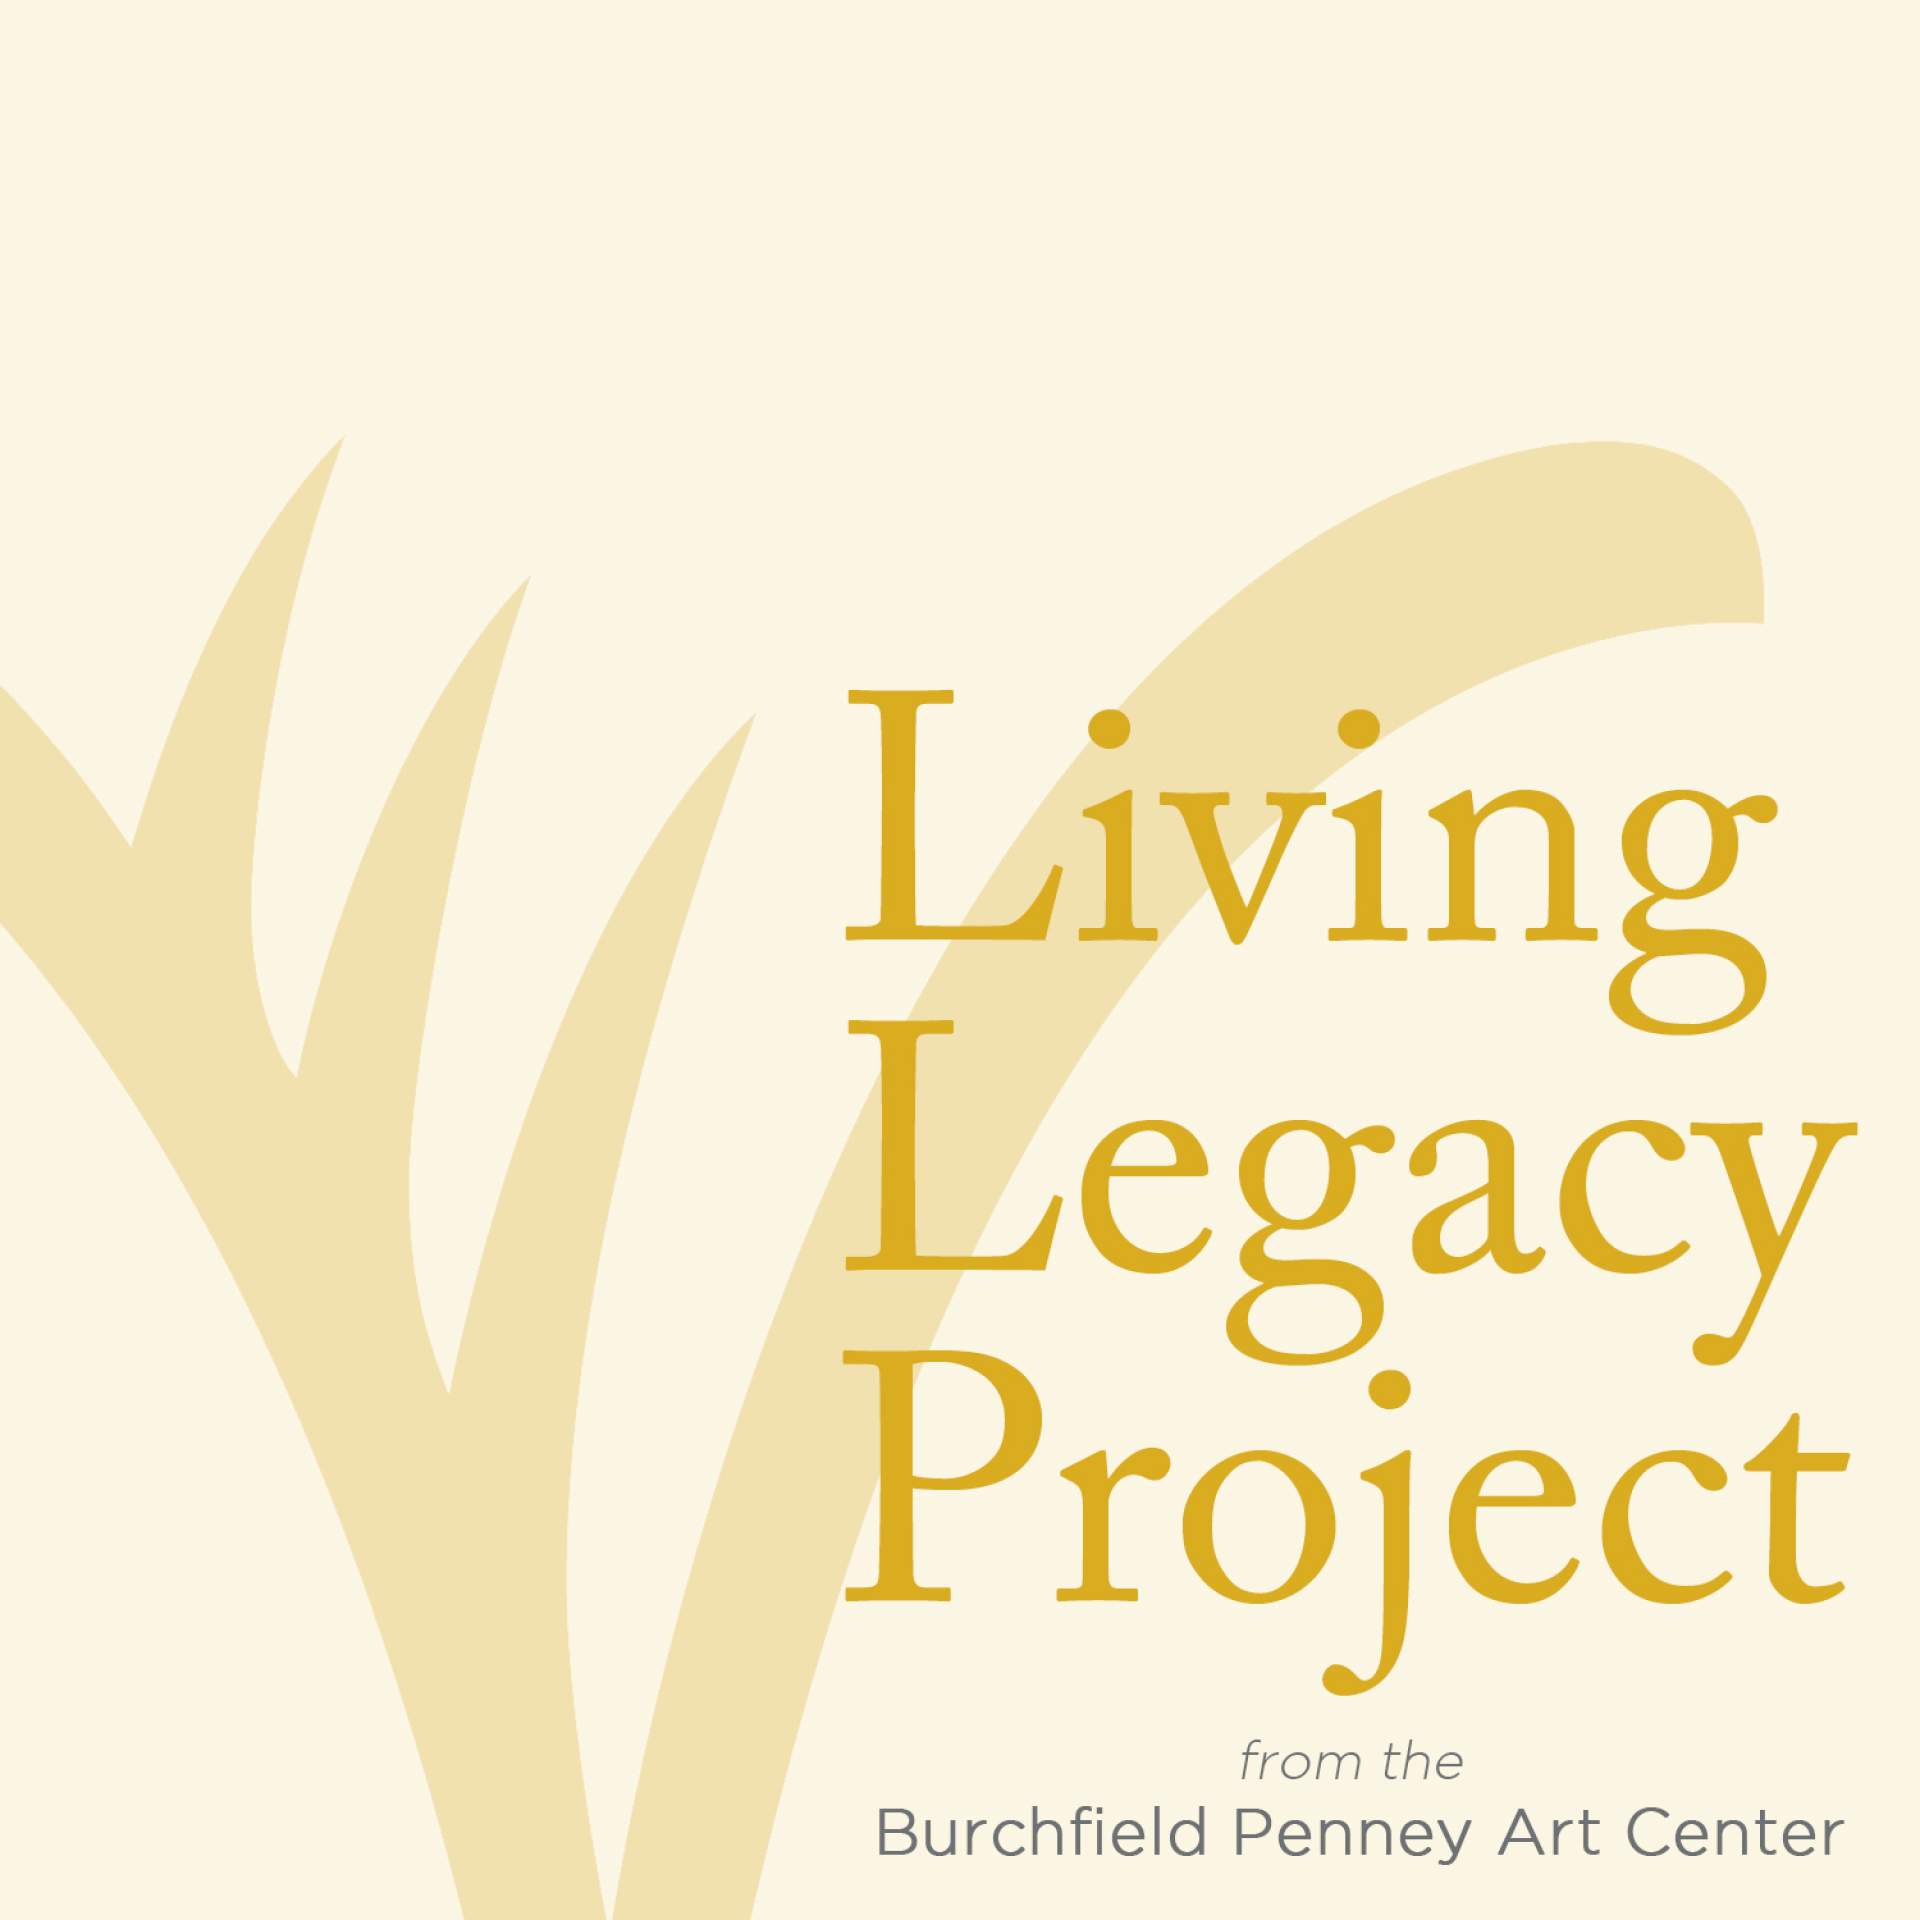 The Living Legacy Project at the Burchfield Penney Art Center